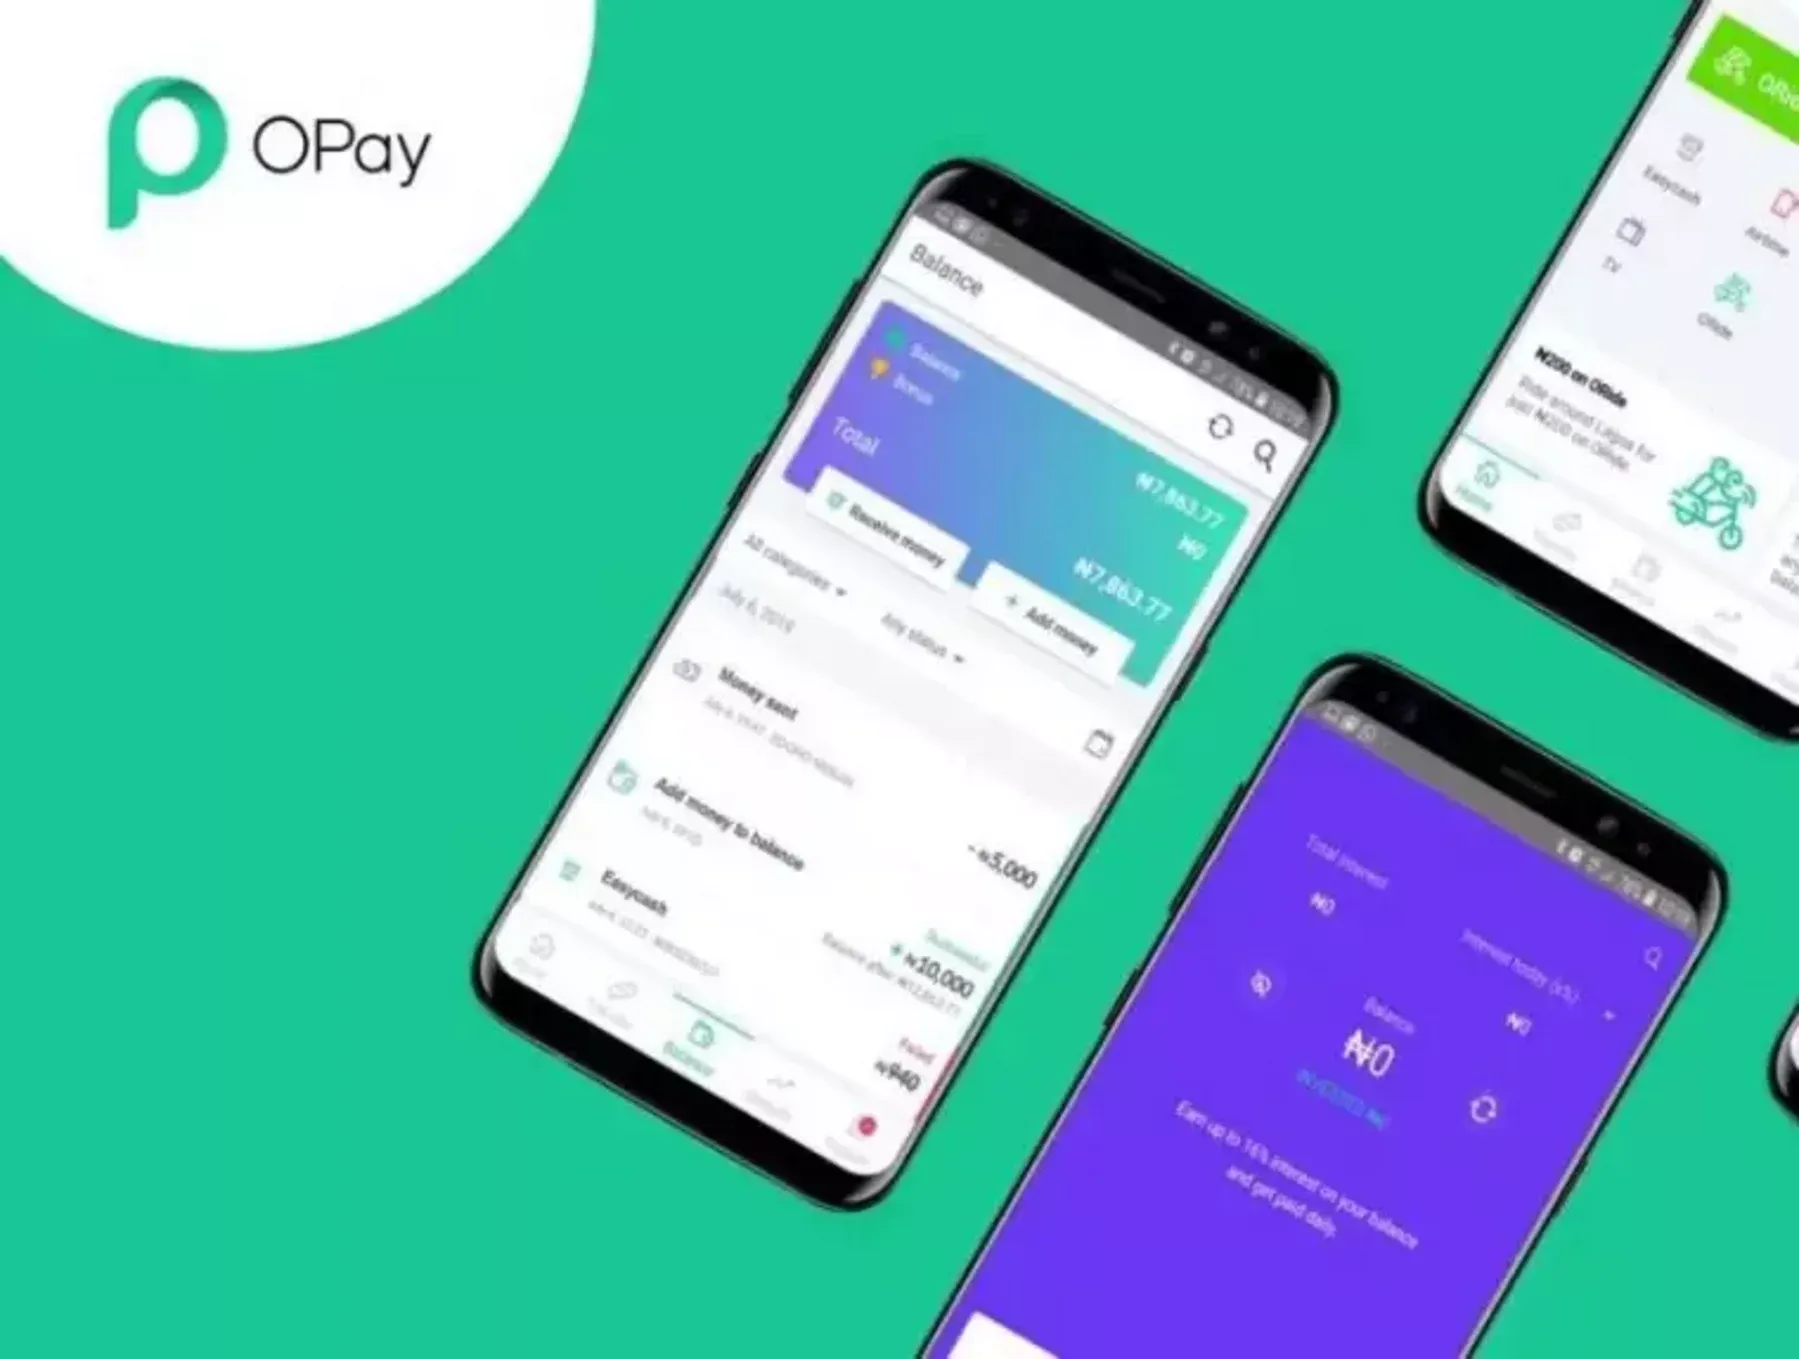 OPay’s Valuation Soars to Nearly $3B Despite Tech Startup Funding Decline